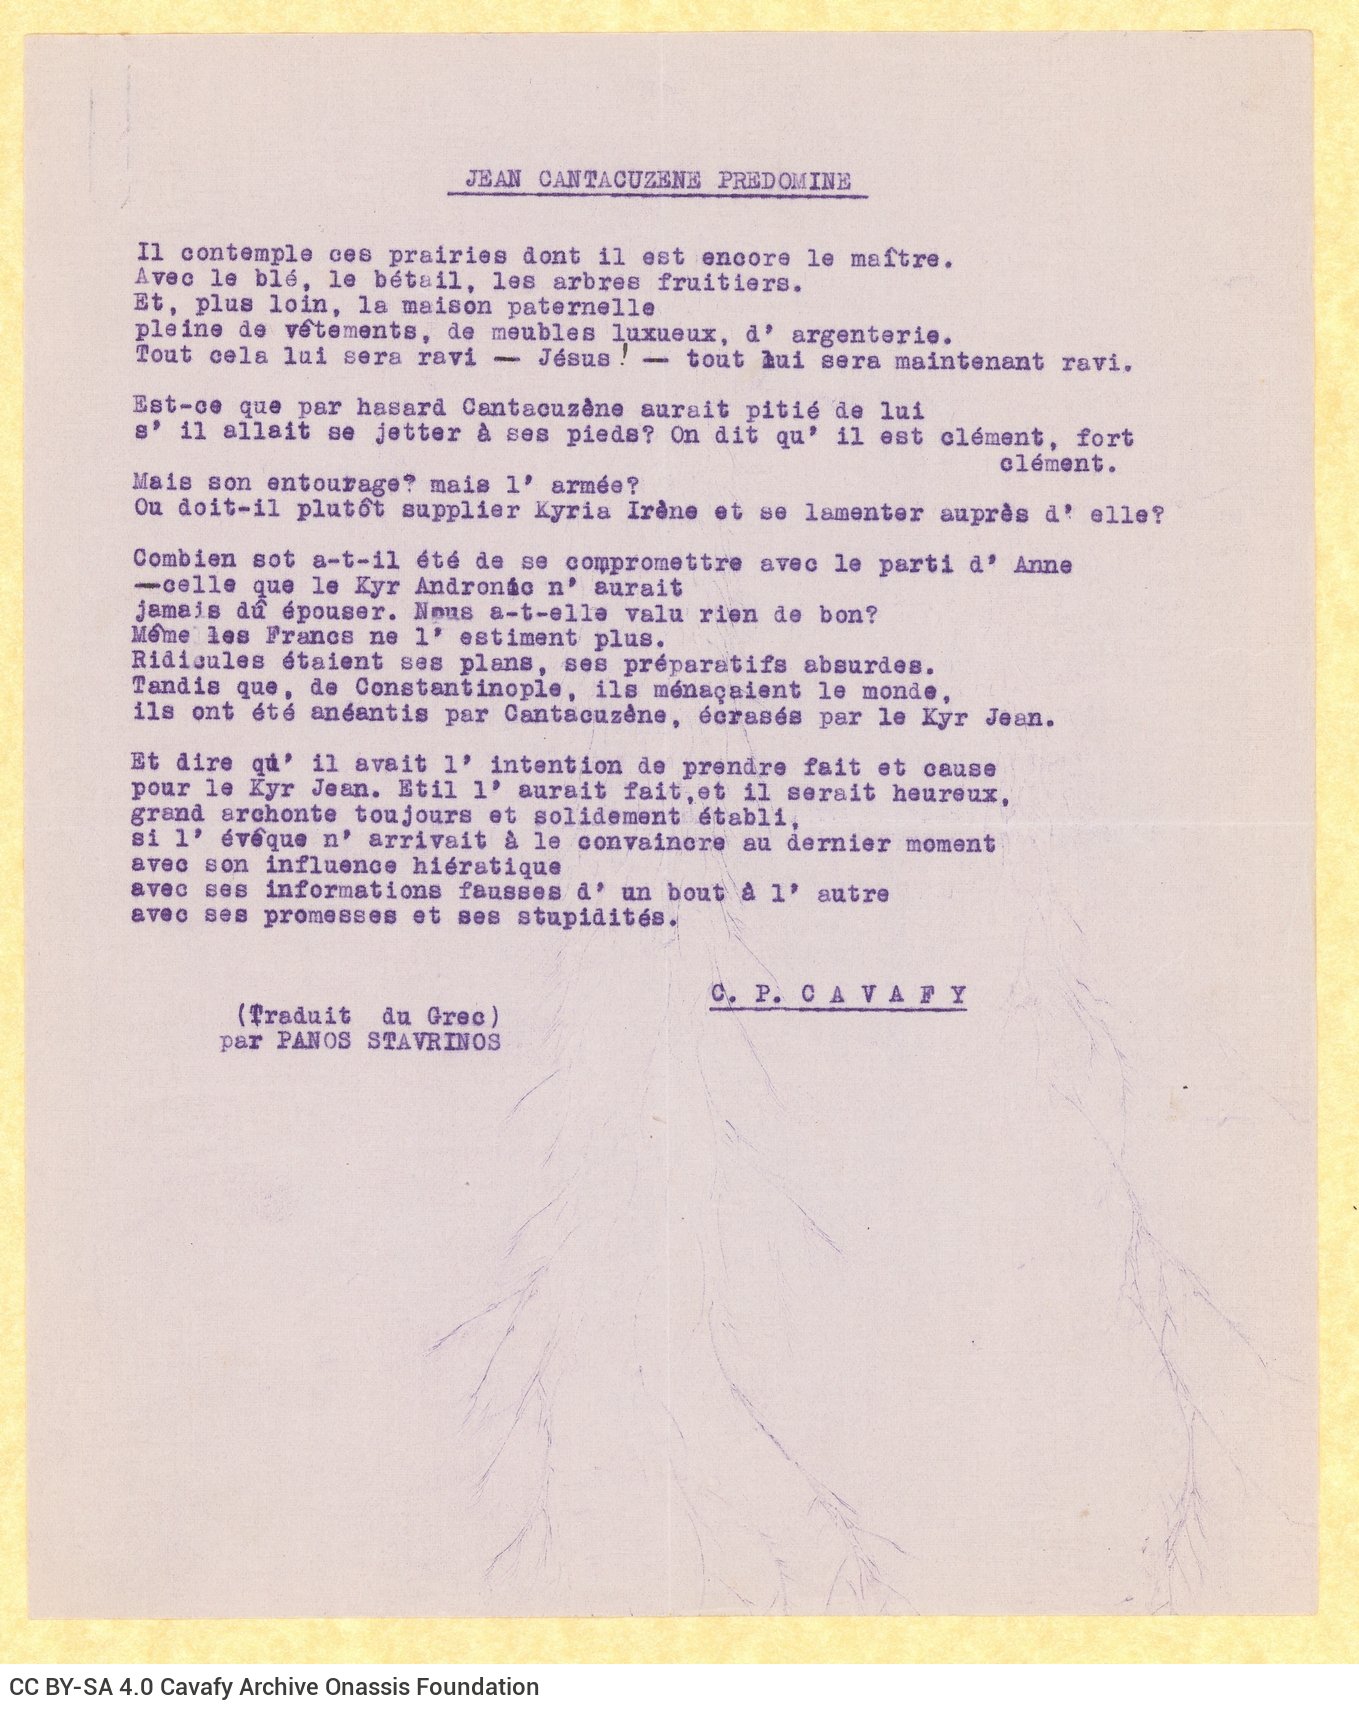 Typewritten French translation of the poem "John Cantacuzenus Triumphs", in four copies. Panos Stavrinos is mentioned as tran